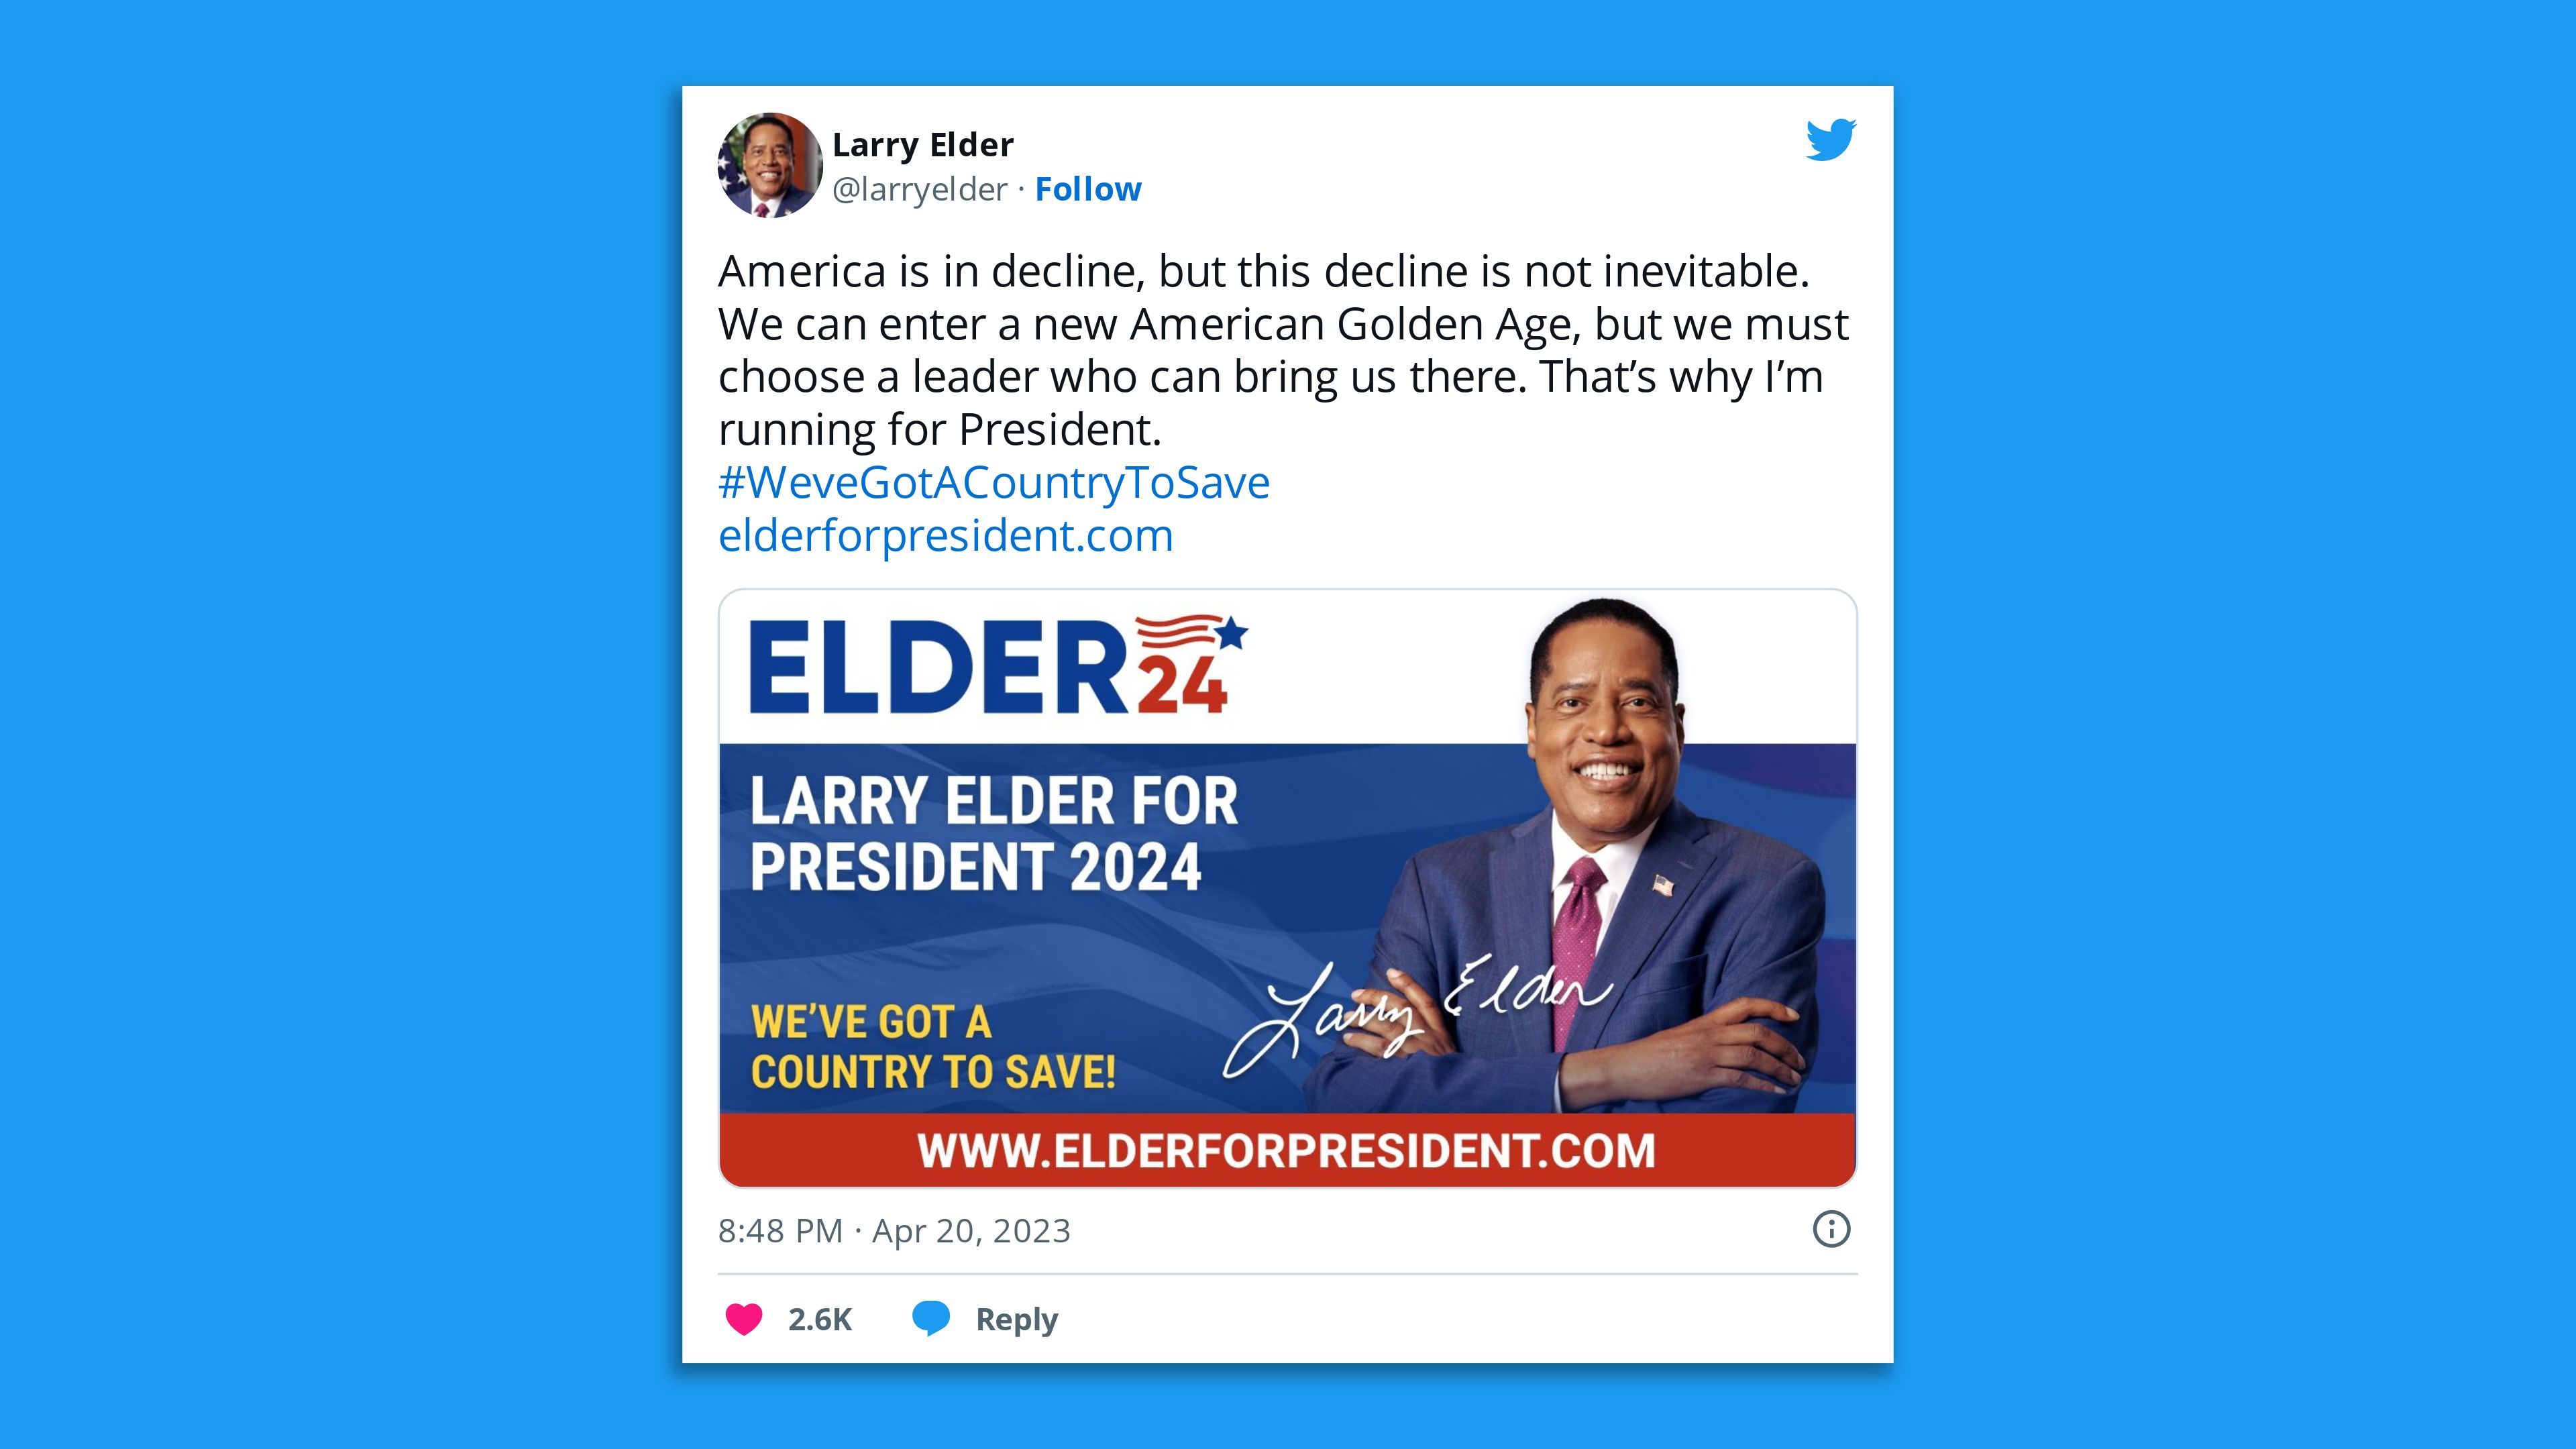 A tweet by radio host Larry Elder announcing he's running for president in 2024.